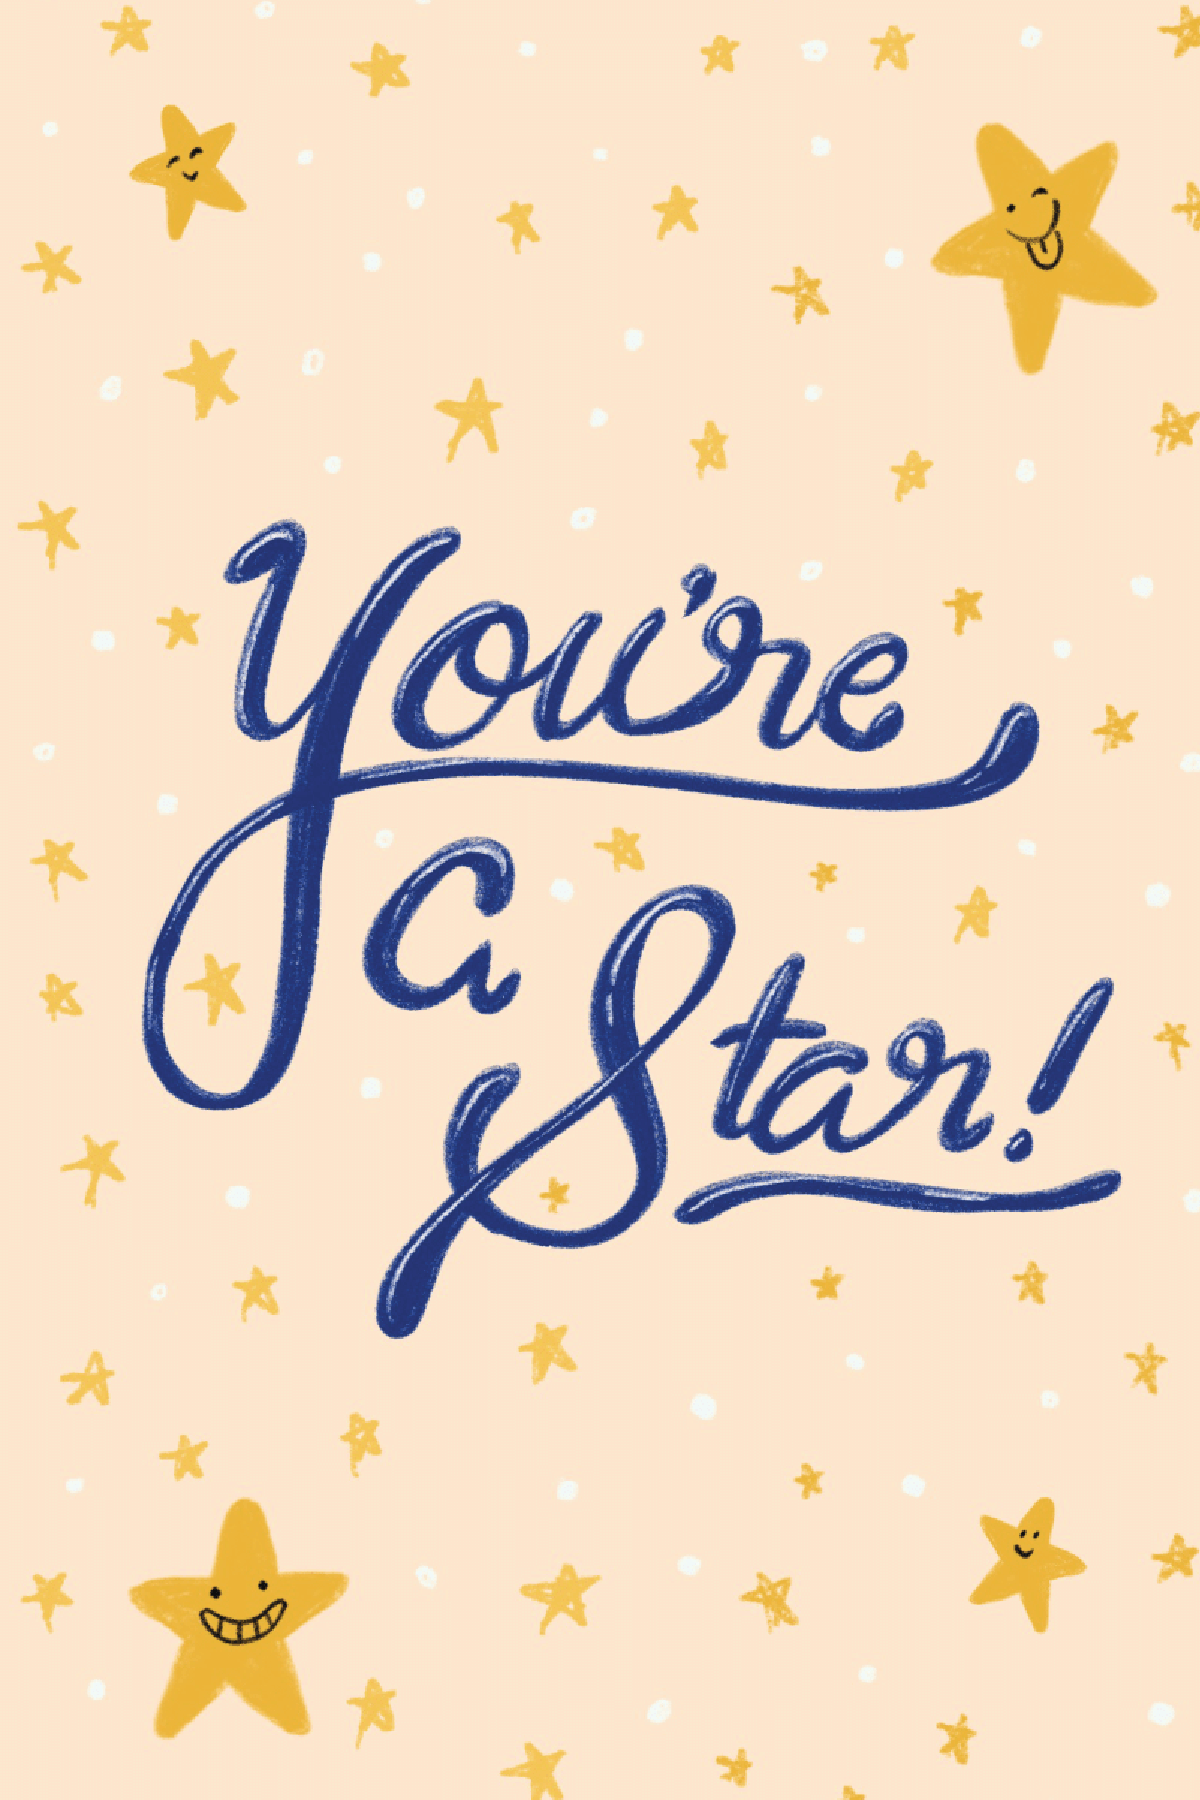 You're a Star!